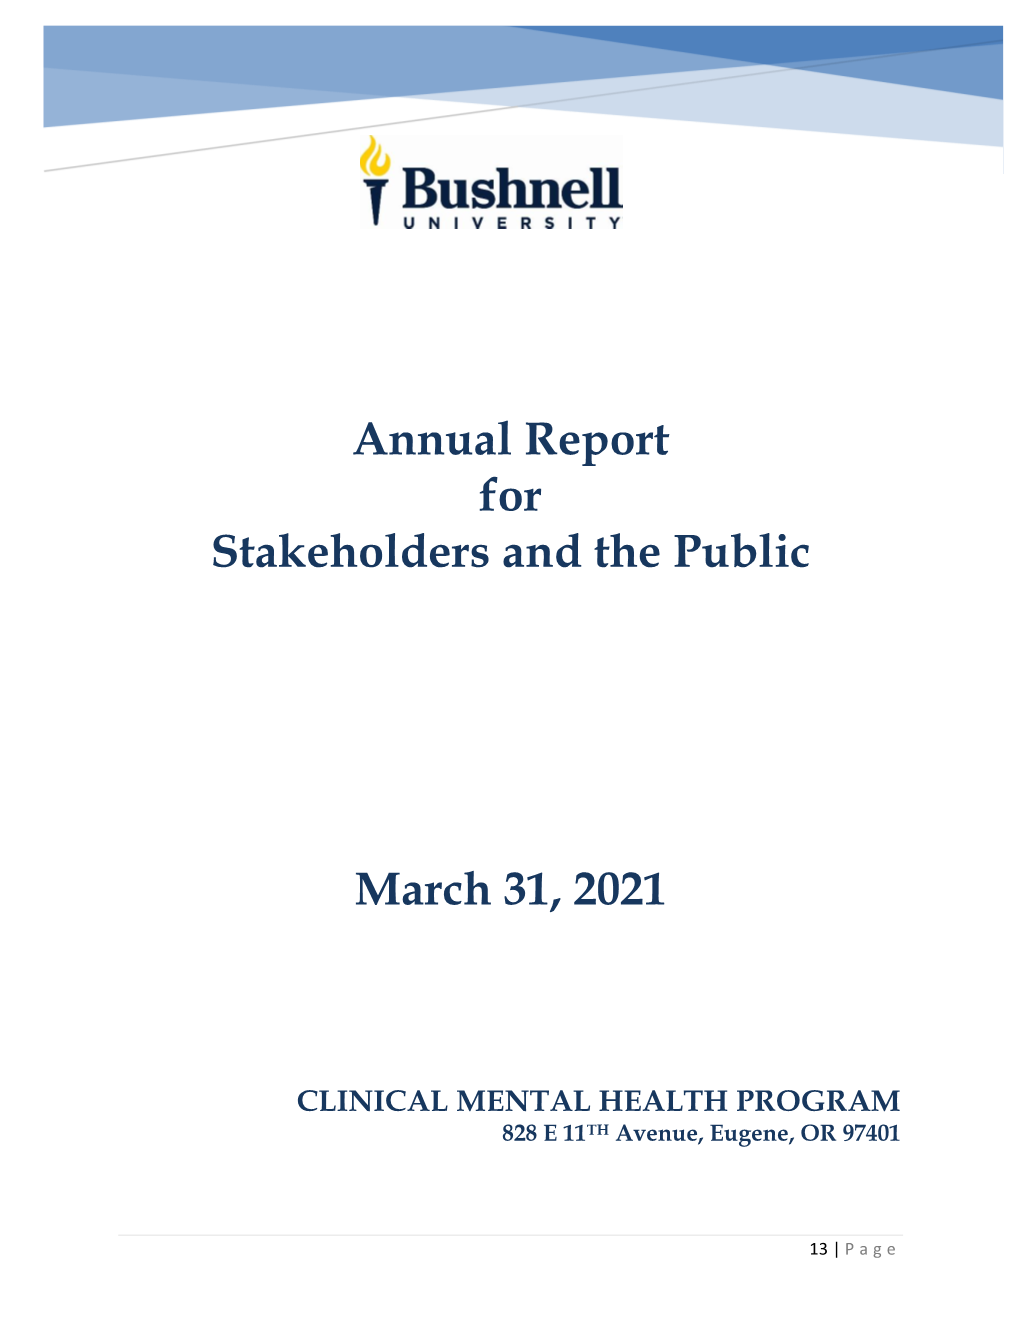 Annual Report for Stakeholders and the Public March 31, 2021